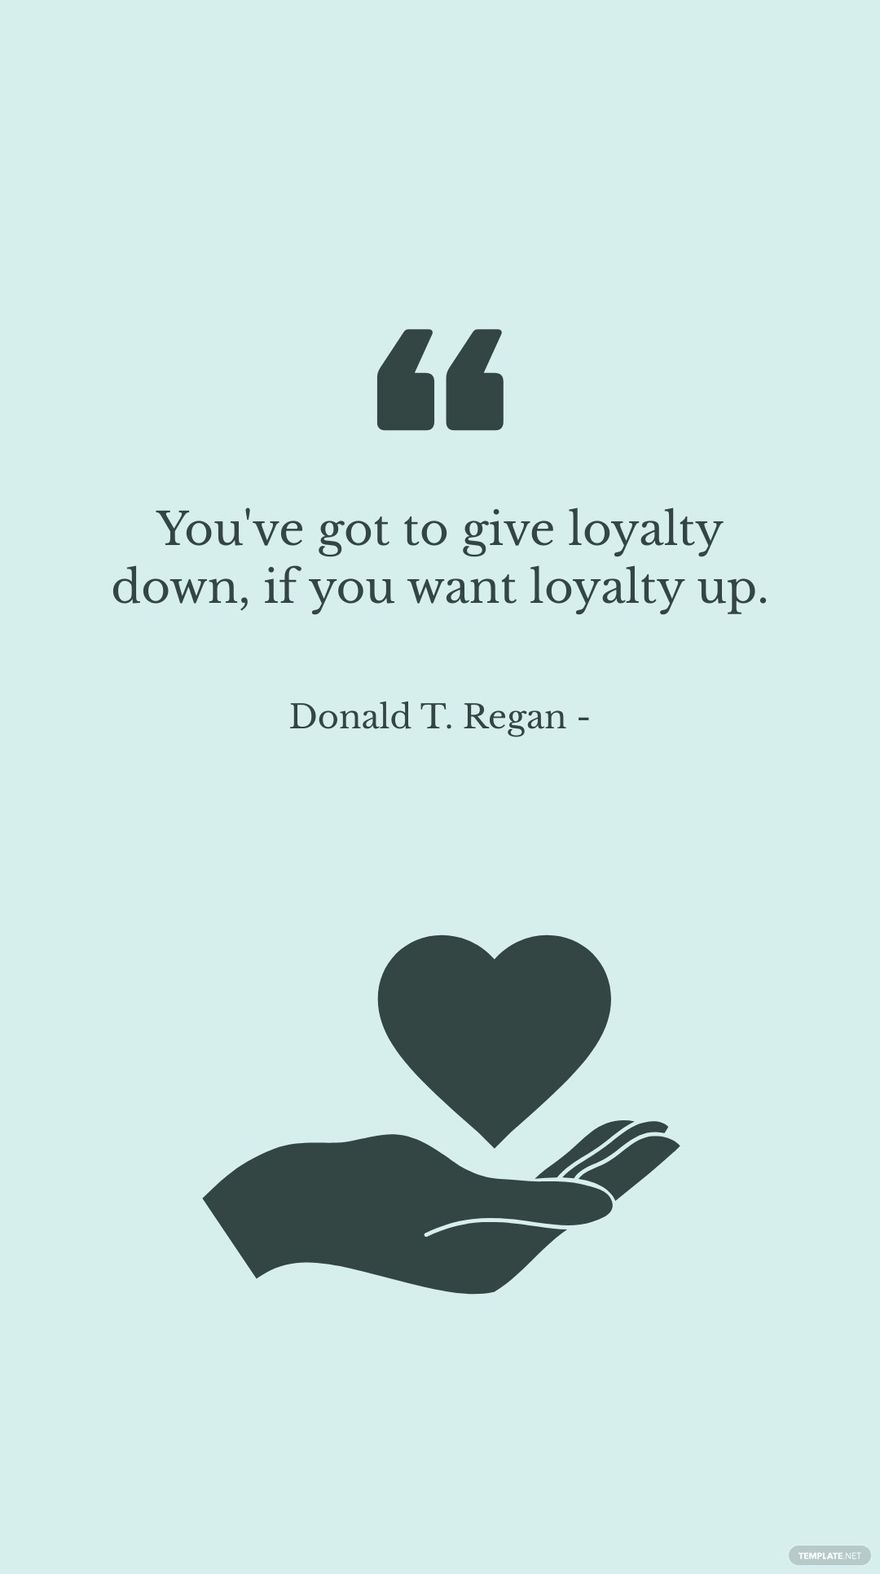 Donald T. Regan - You've got to give loyalty down, if you want loyalty up.